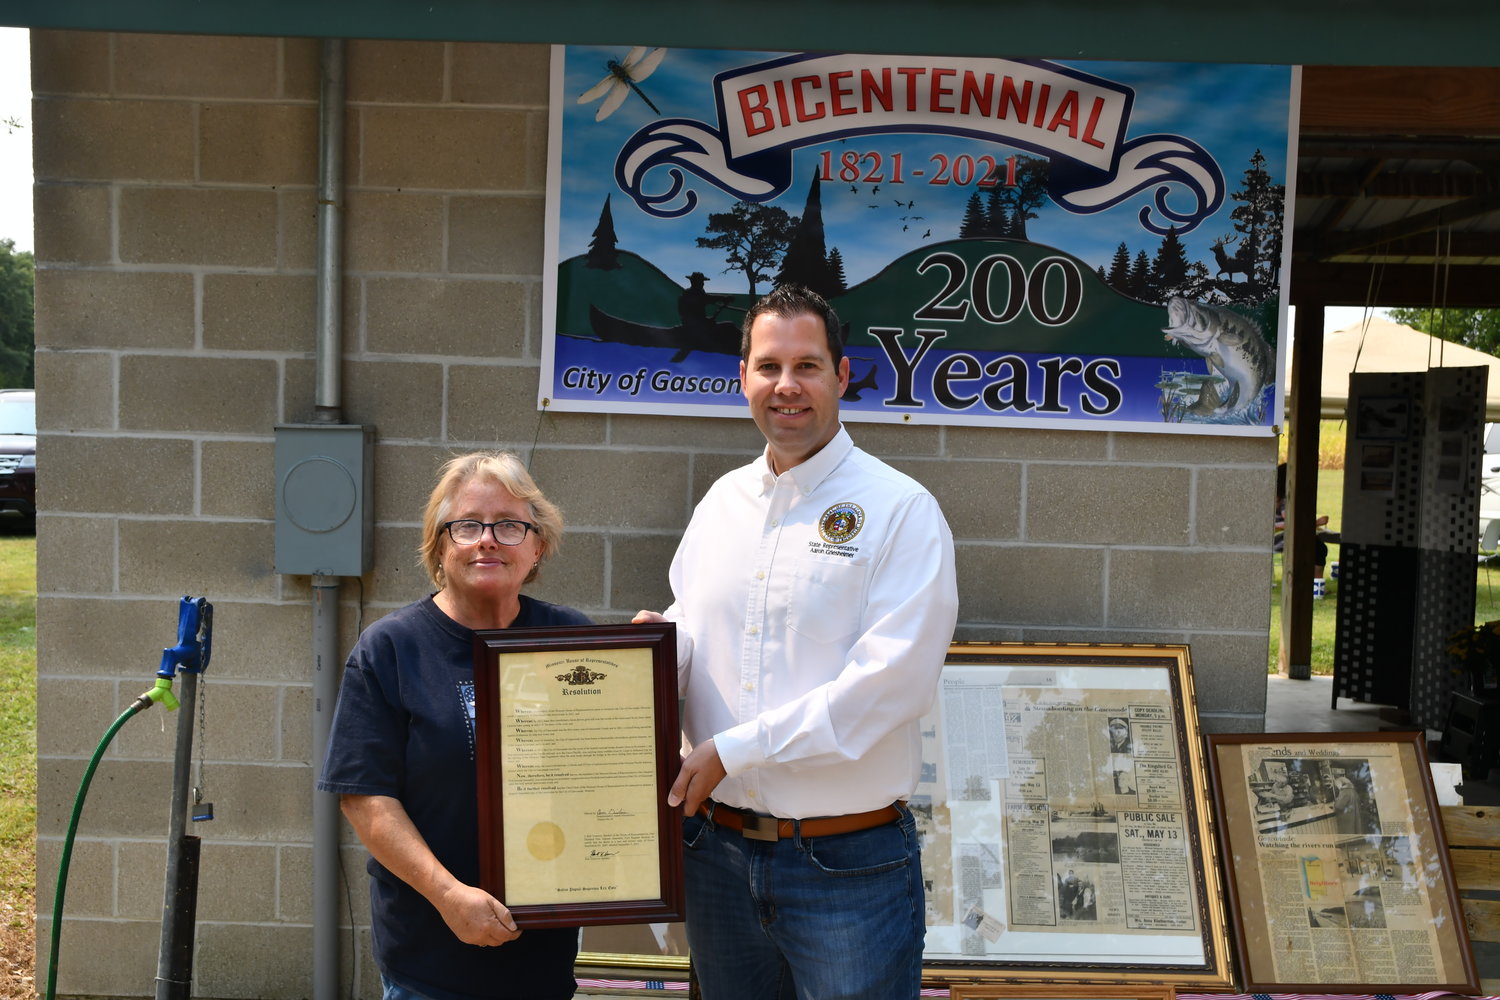 An estimated 300 people attended the festivities planned by members of the Board of Aldermen, according to Mayor Debbie Green. State Rep. Aaron Griesheimer presented Green with a House resolution.